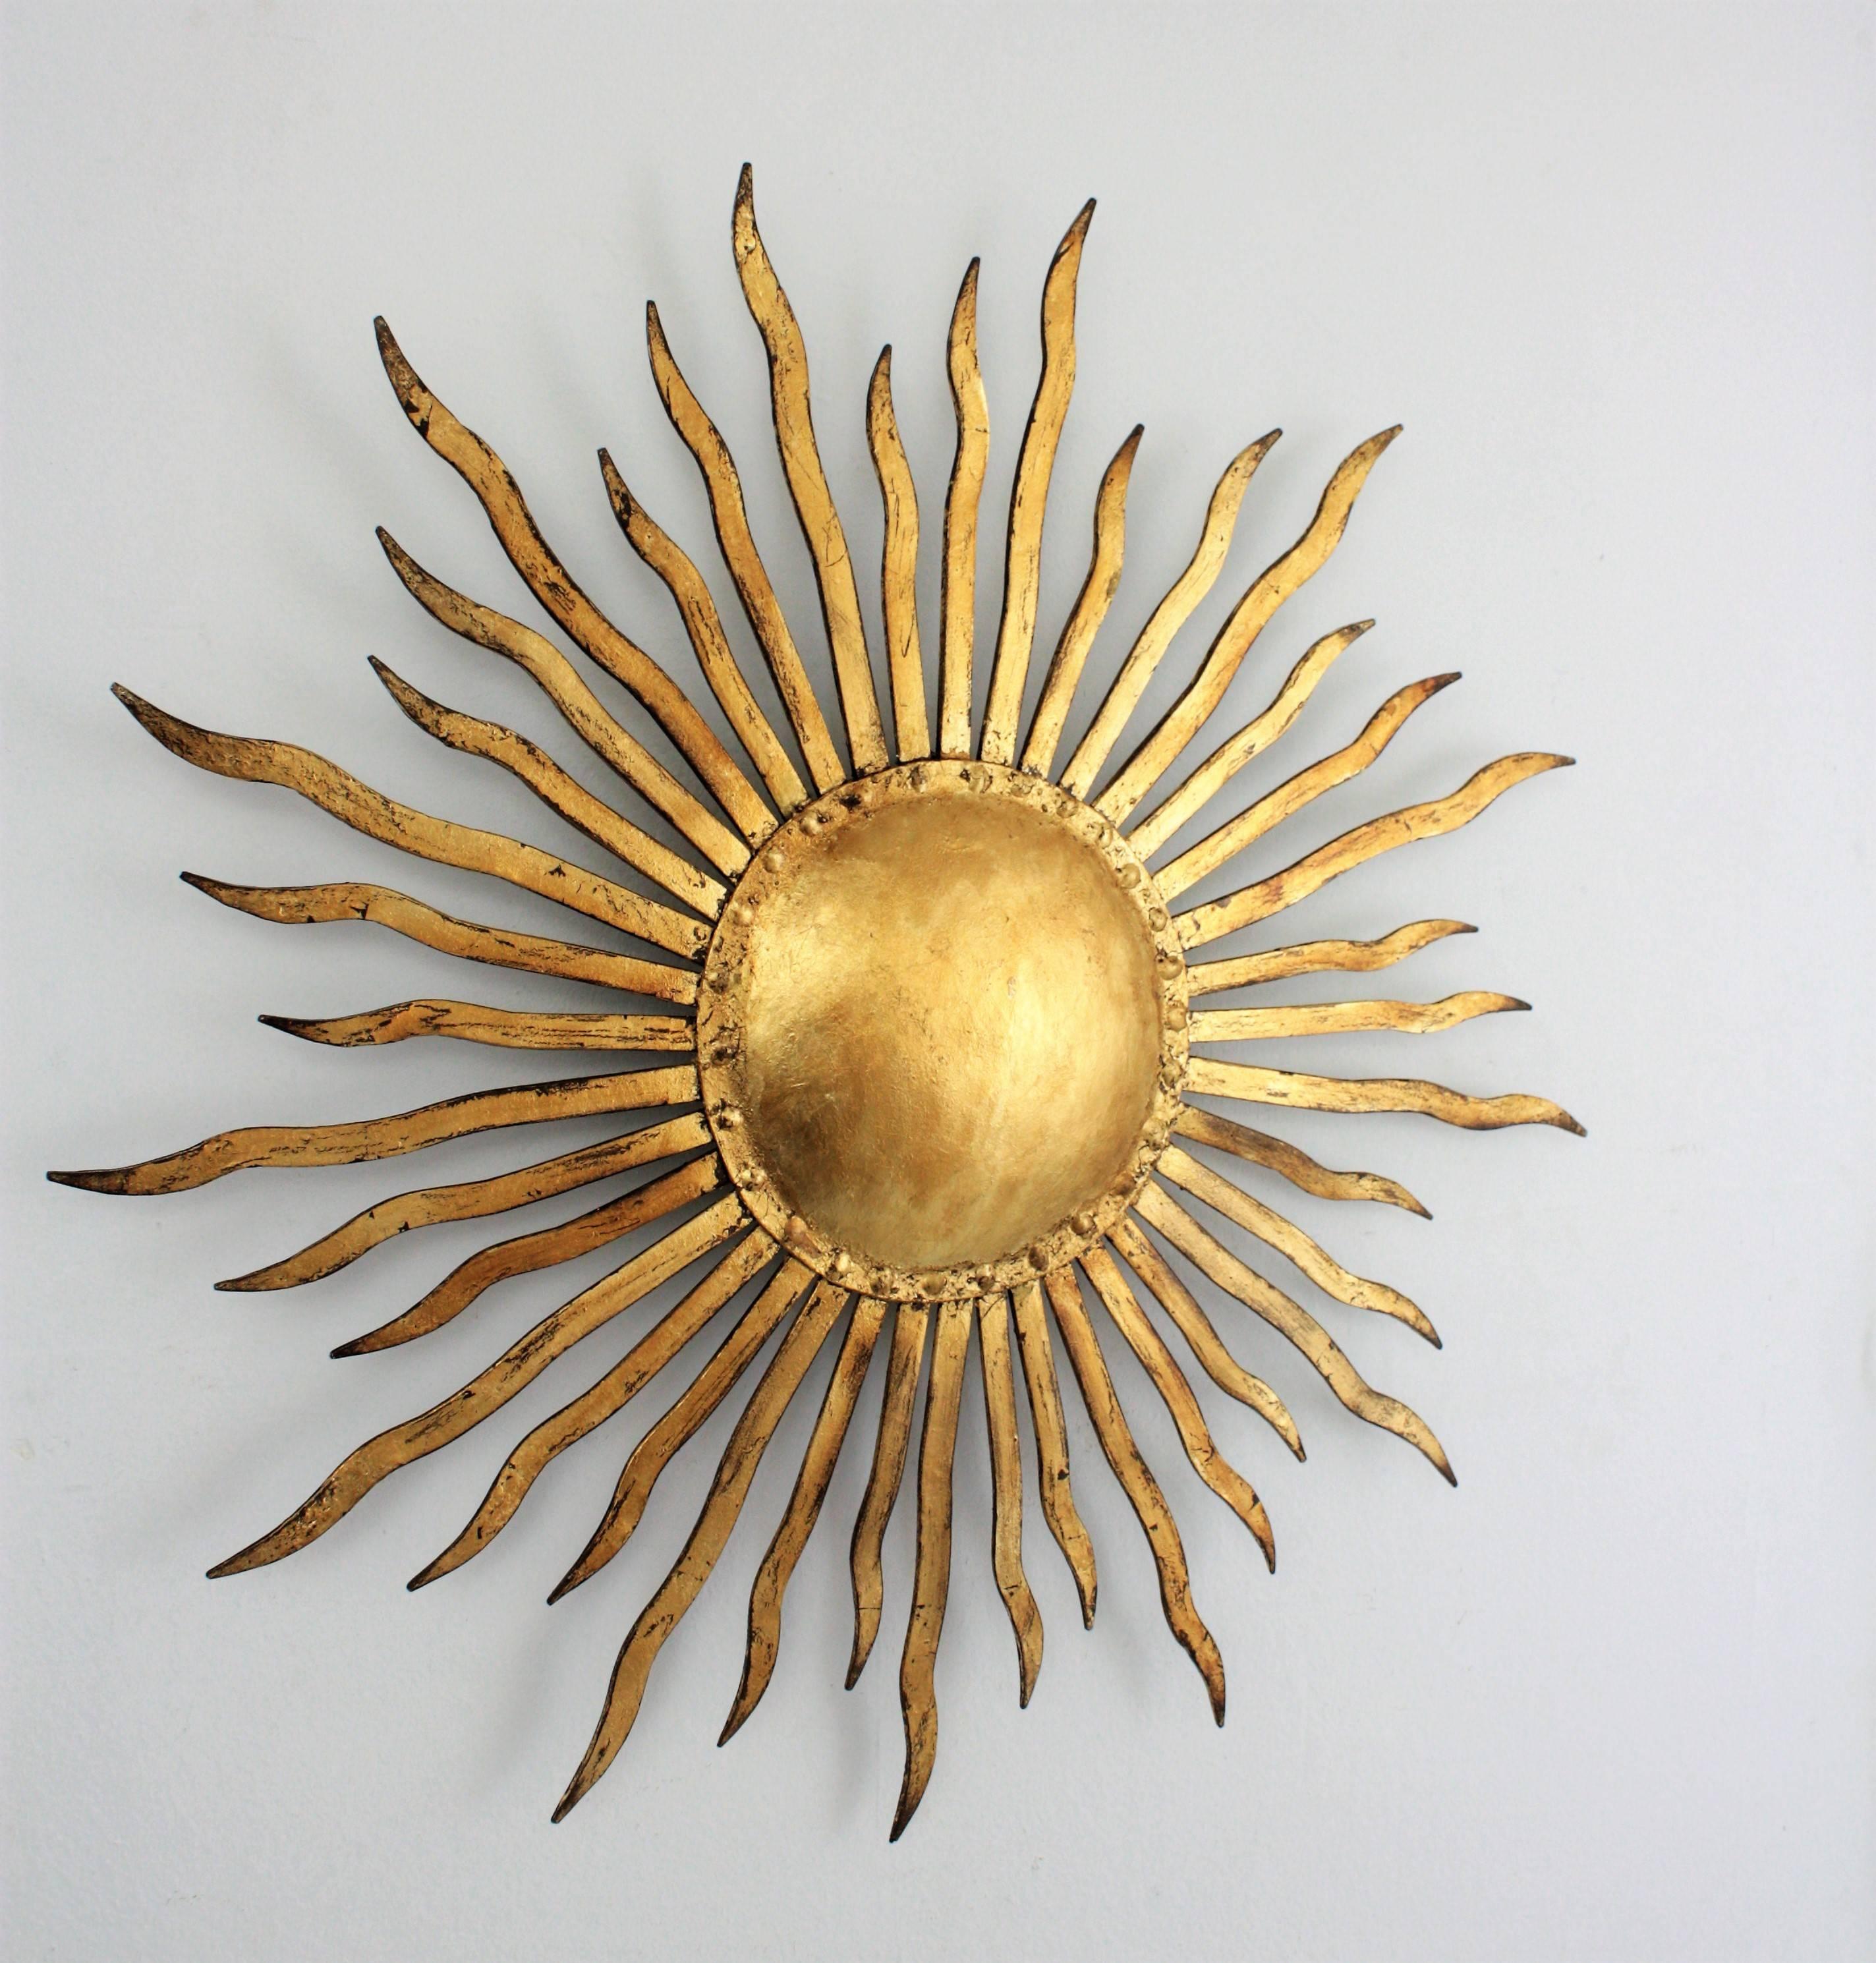 A beautiful sunburst wall sconce or wall sculpture with gold leaf finish made in wrought iron. It has beautiful details of nails surrounding the central sphere, Spain, 1950s
Lovely to place it alone but also gorgeous mixed with other wall